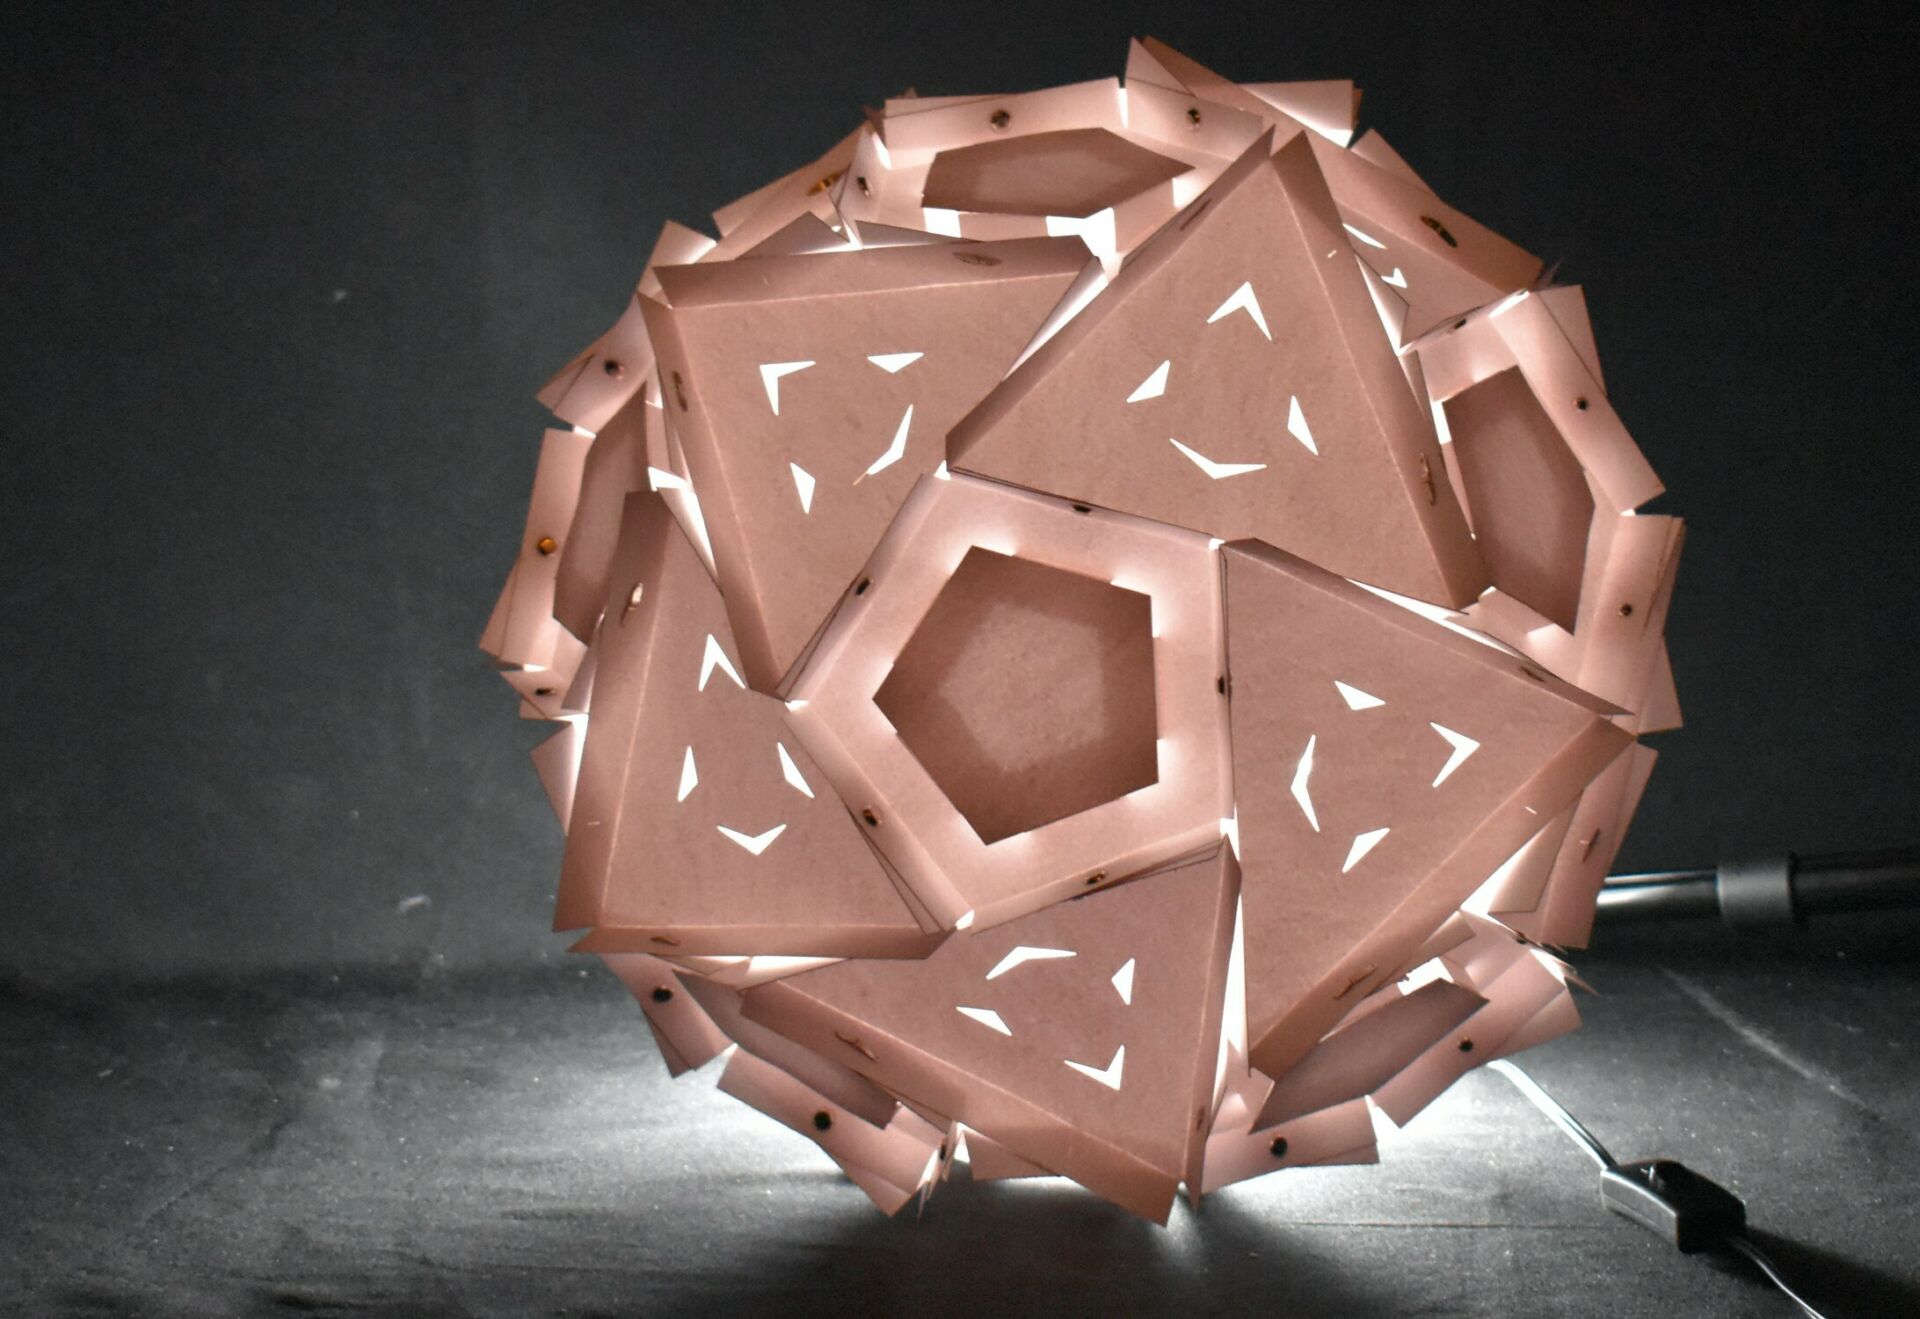 A spherical architectural lantern with light emanating from within a repeating pattern of laser-cut facets.